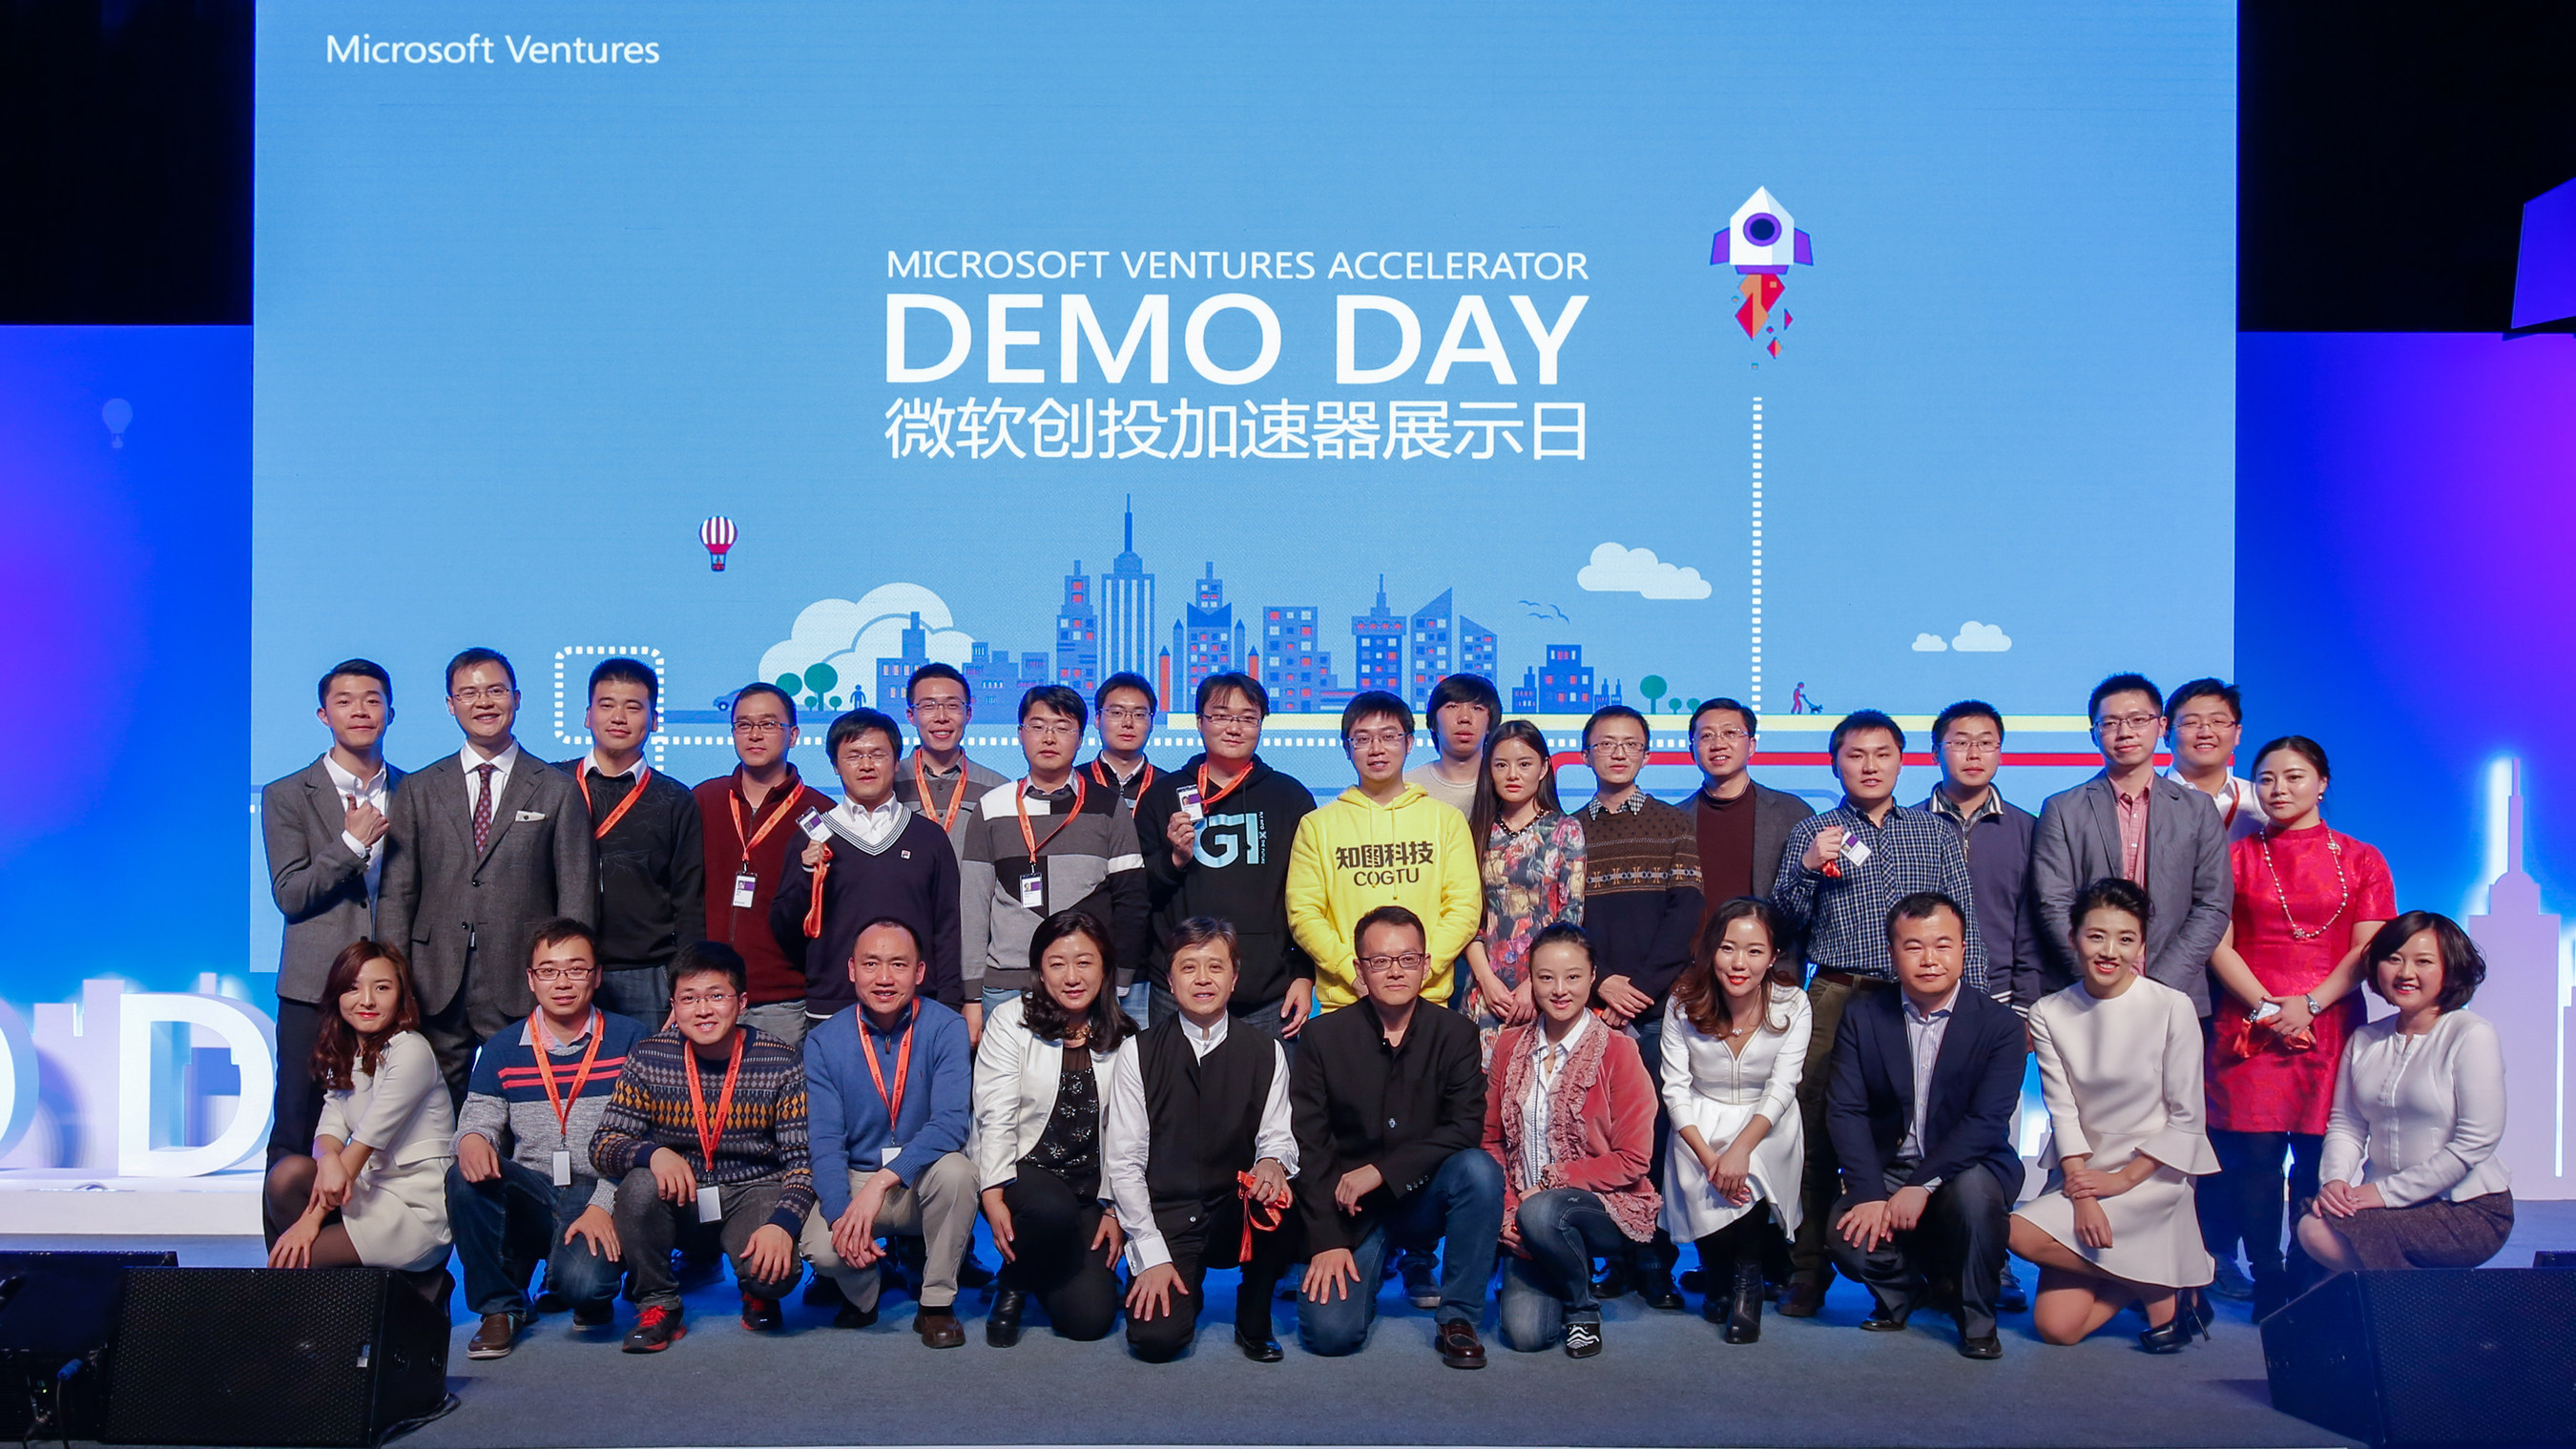 Microsoft Ventures Accelerator Jump Starts the Development of 100 Startups in China The Total Valuation of Graduate Enterprises Exceeds RMB 10 Billion